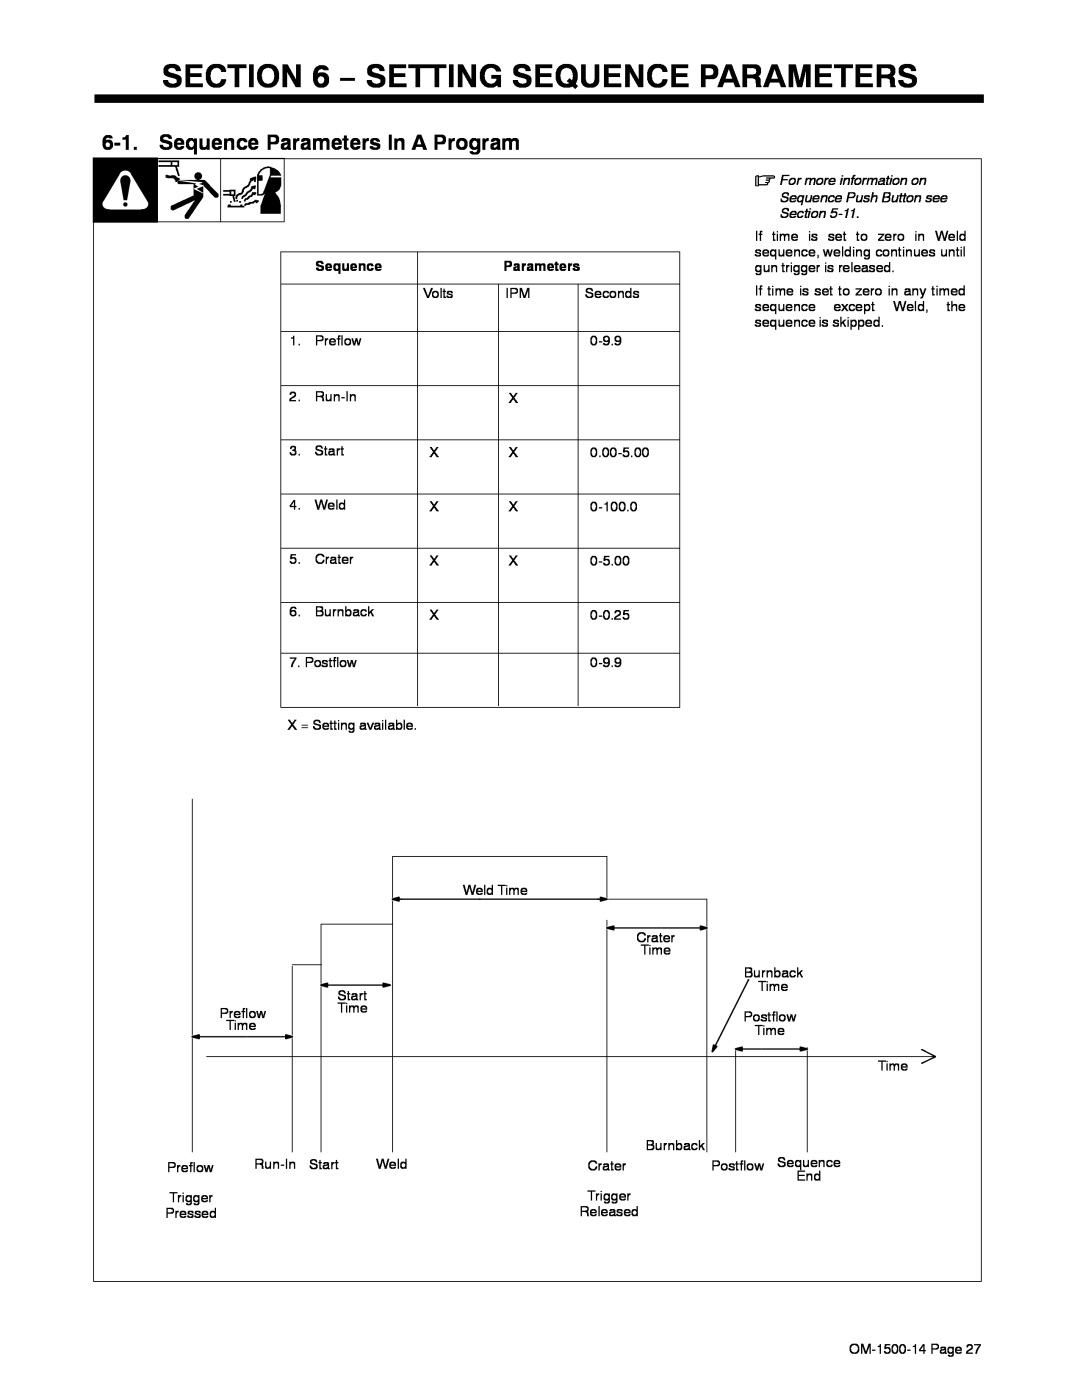 Miller Electric and DS-74DX16, DS-74DX12 manual Setting Sequence Parameters, Sequence Parameters In A Program 